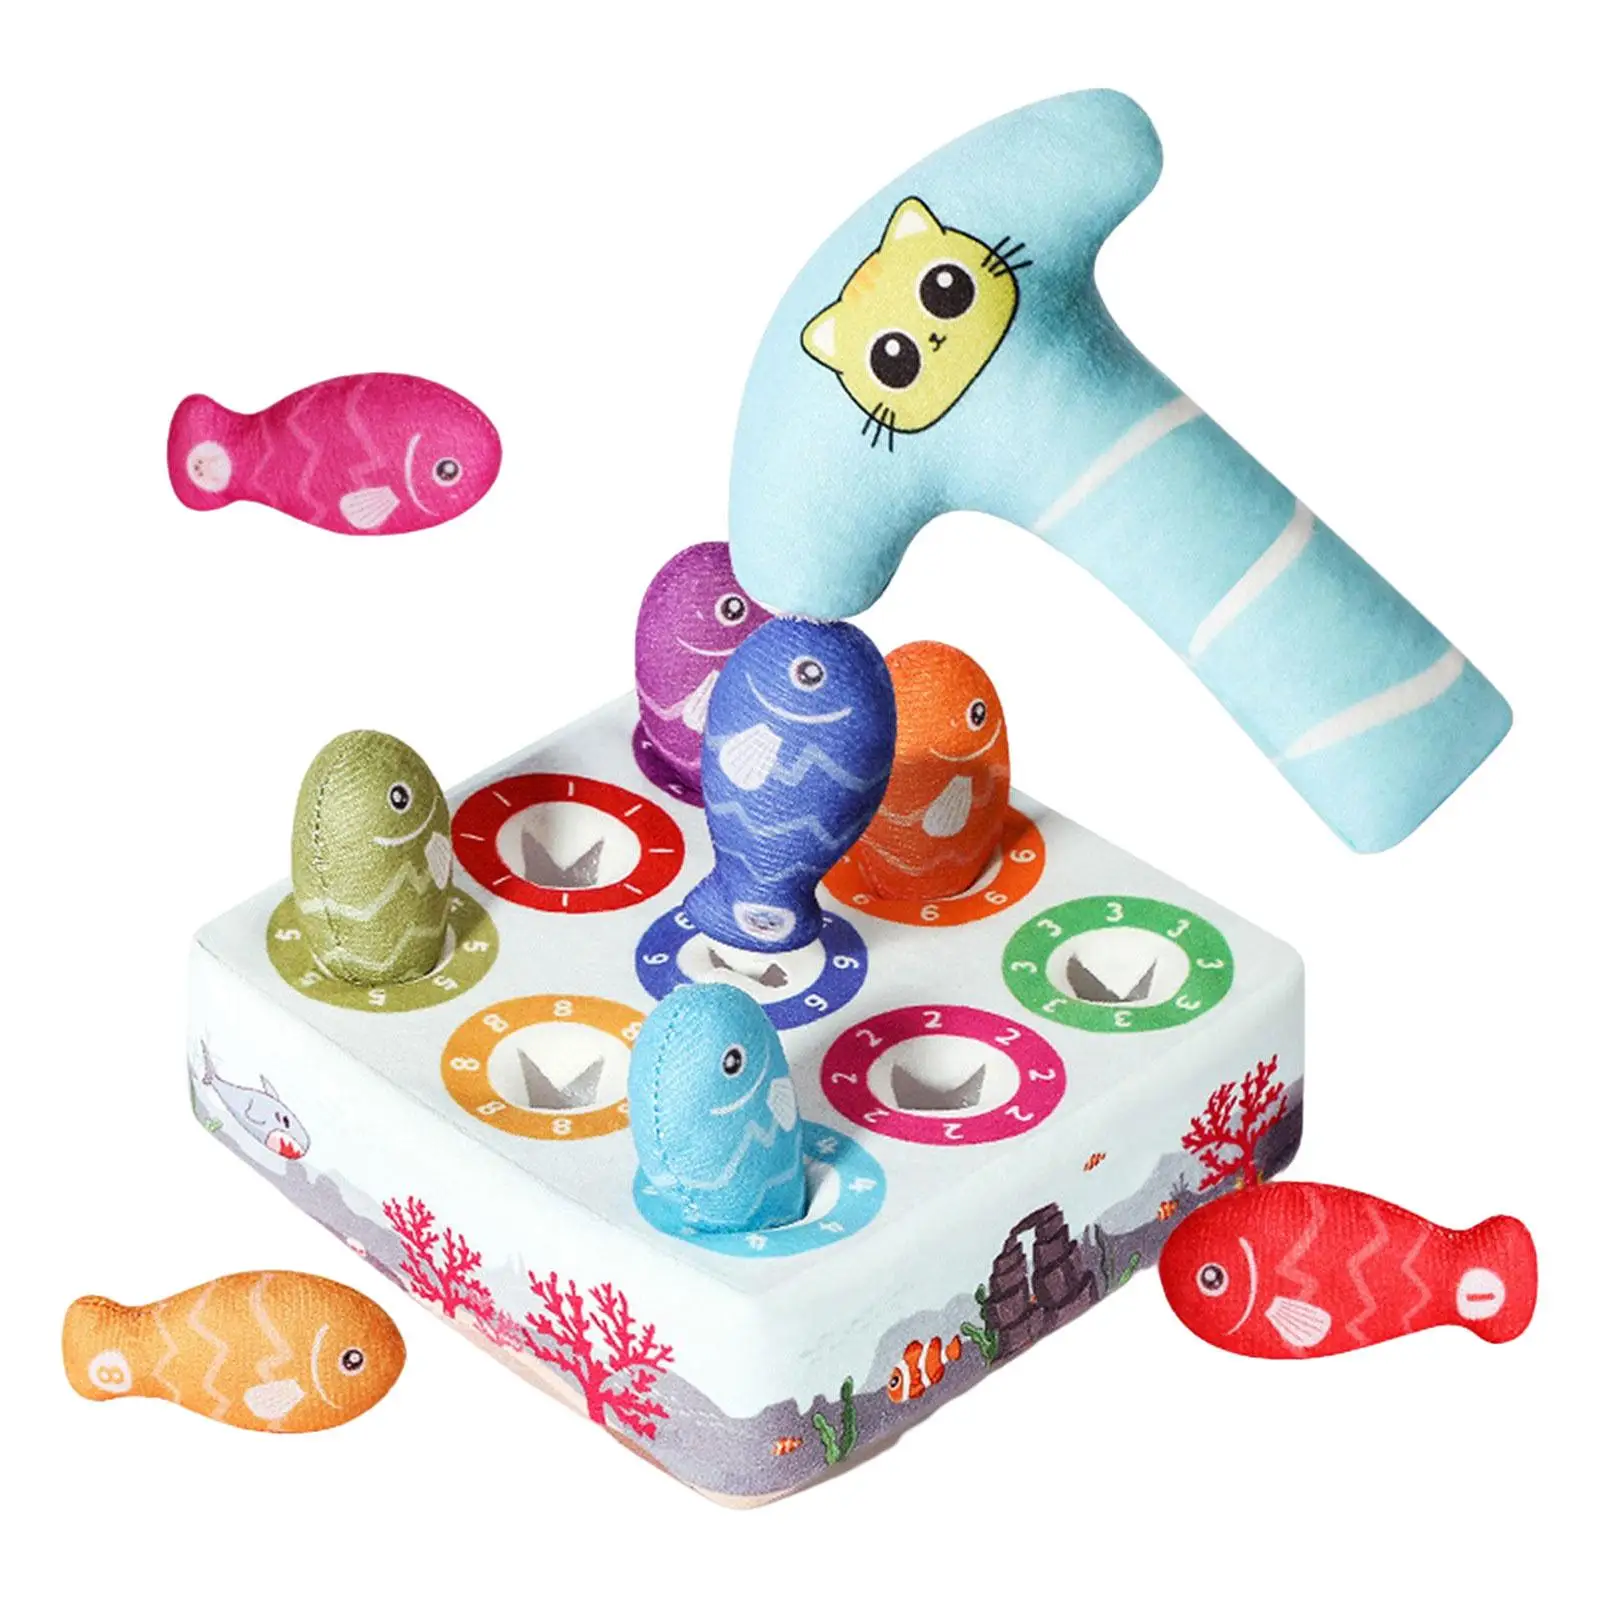 Fishing Game Early Development Toys Color Matching Pull Out Game Educational Baby Pull Out Game for Role Play Interaction Gift